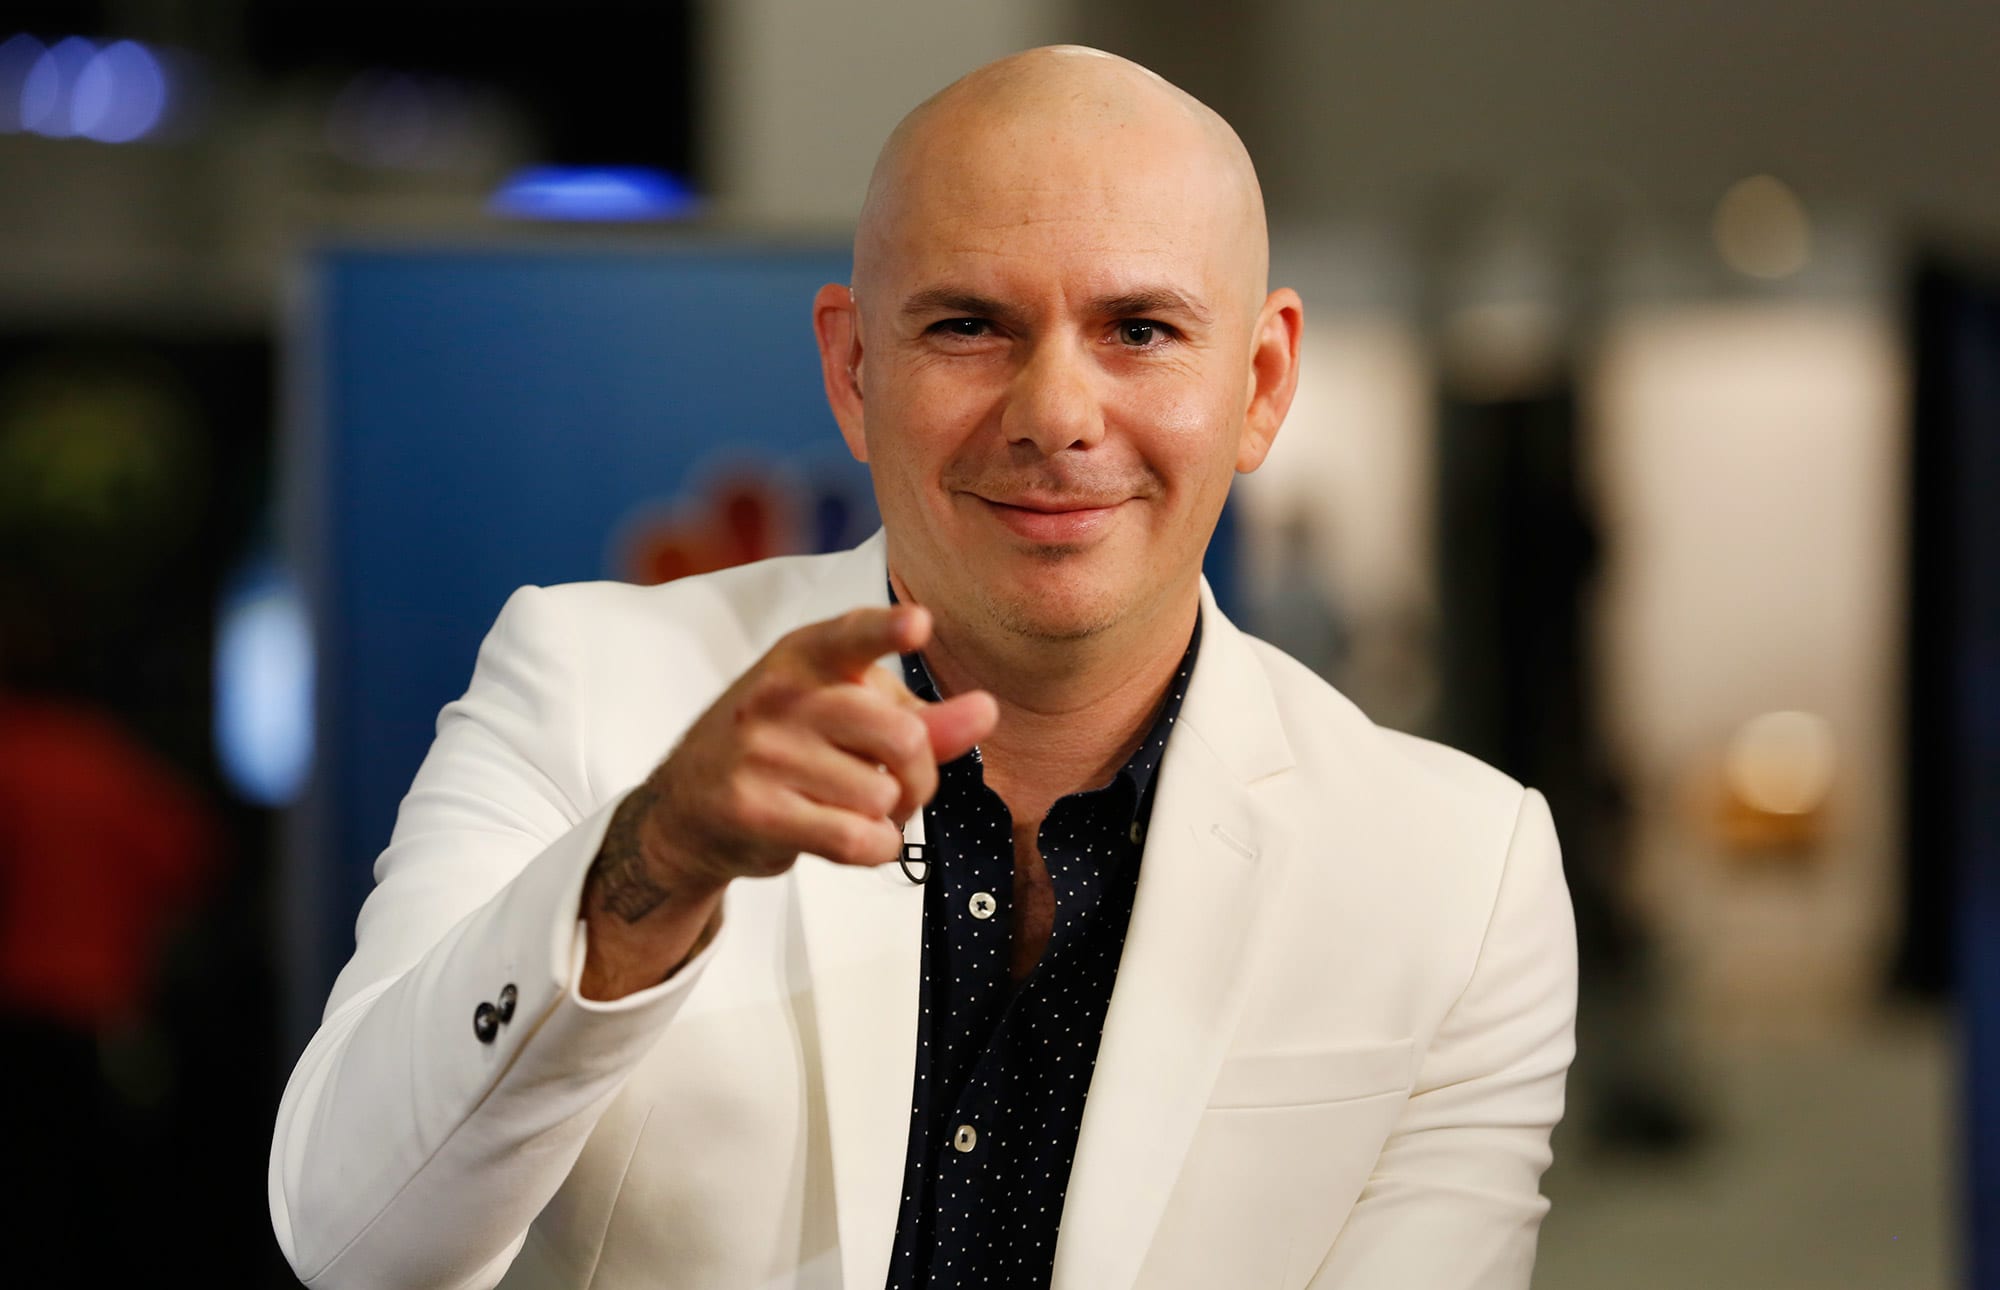 celebrities who are good people - pitbull now